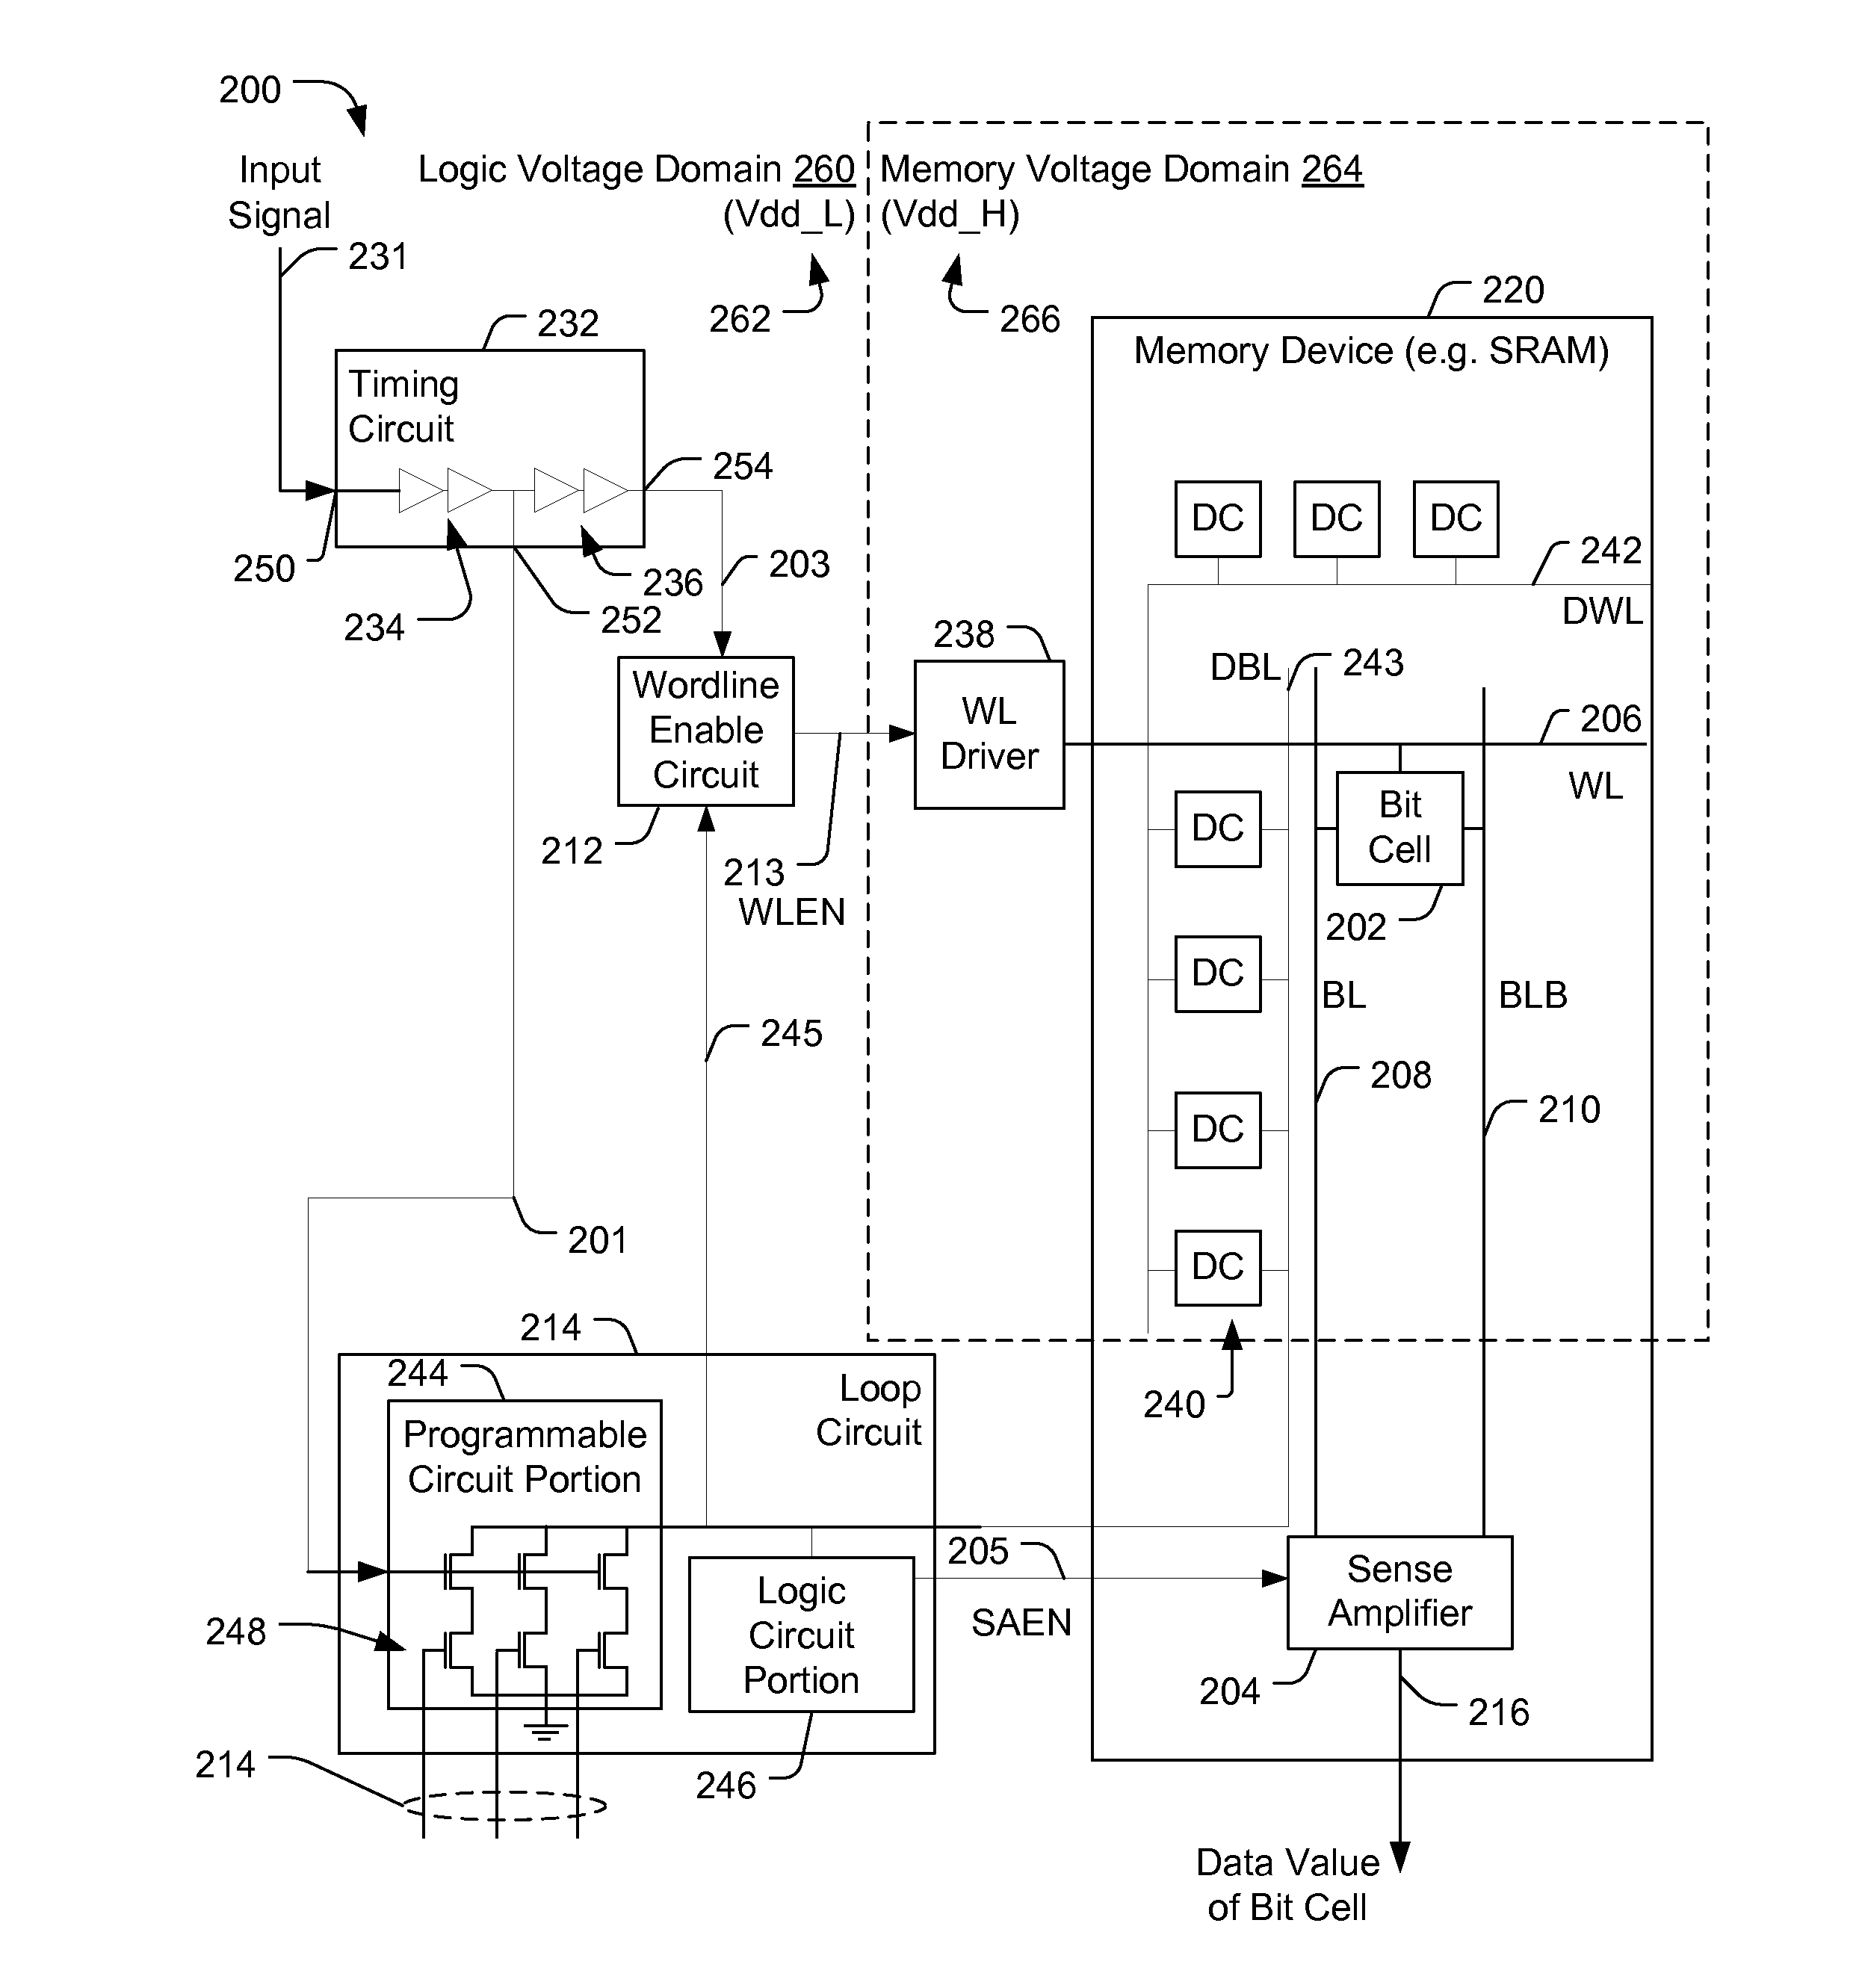 System and Method of Operating a Memory Device